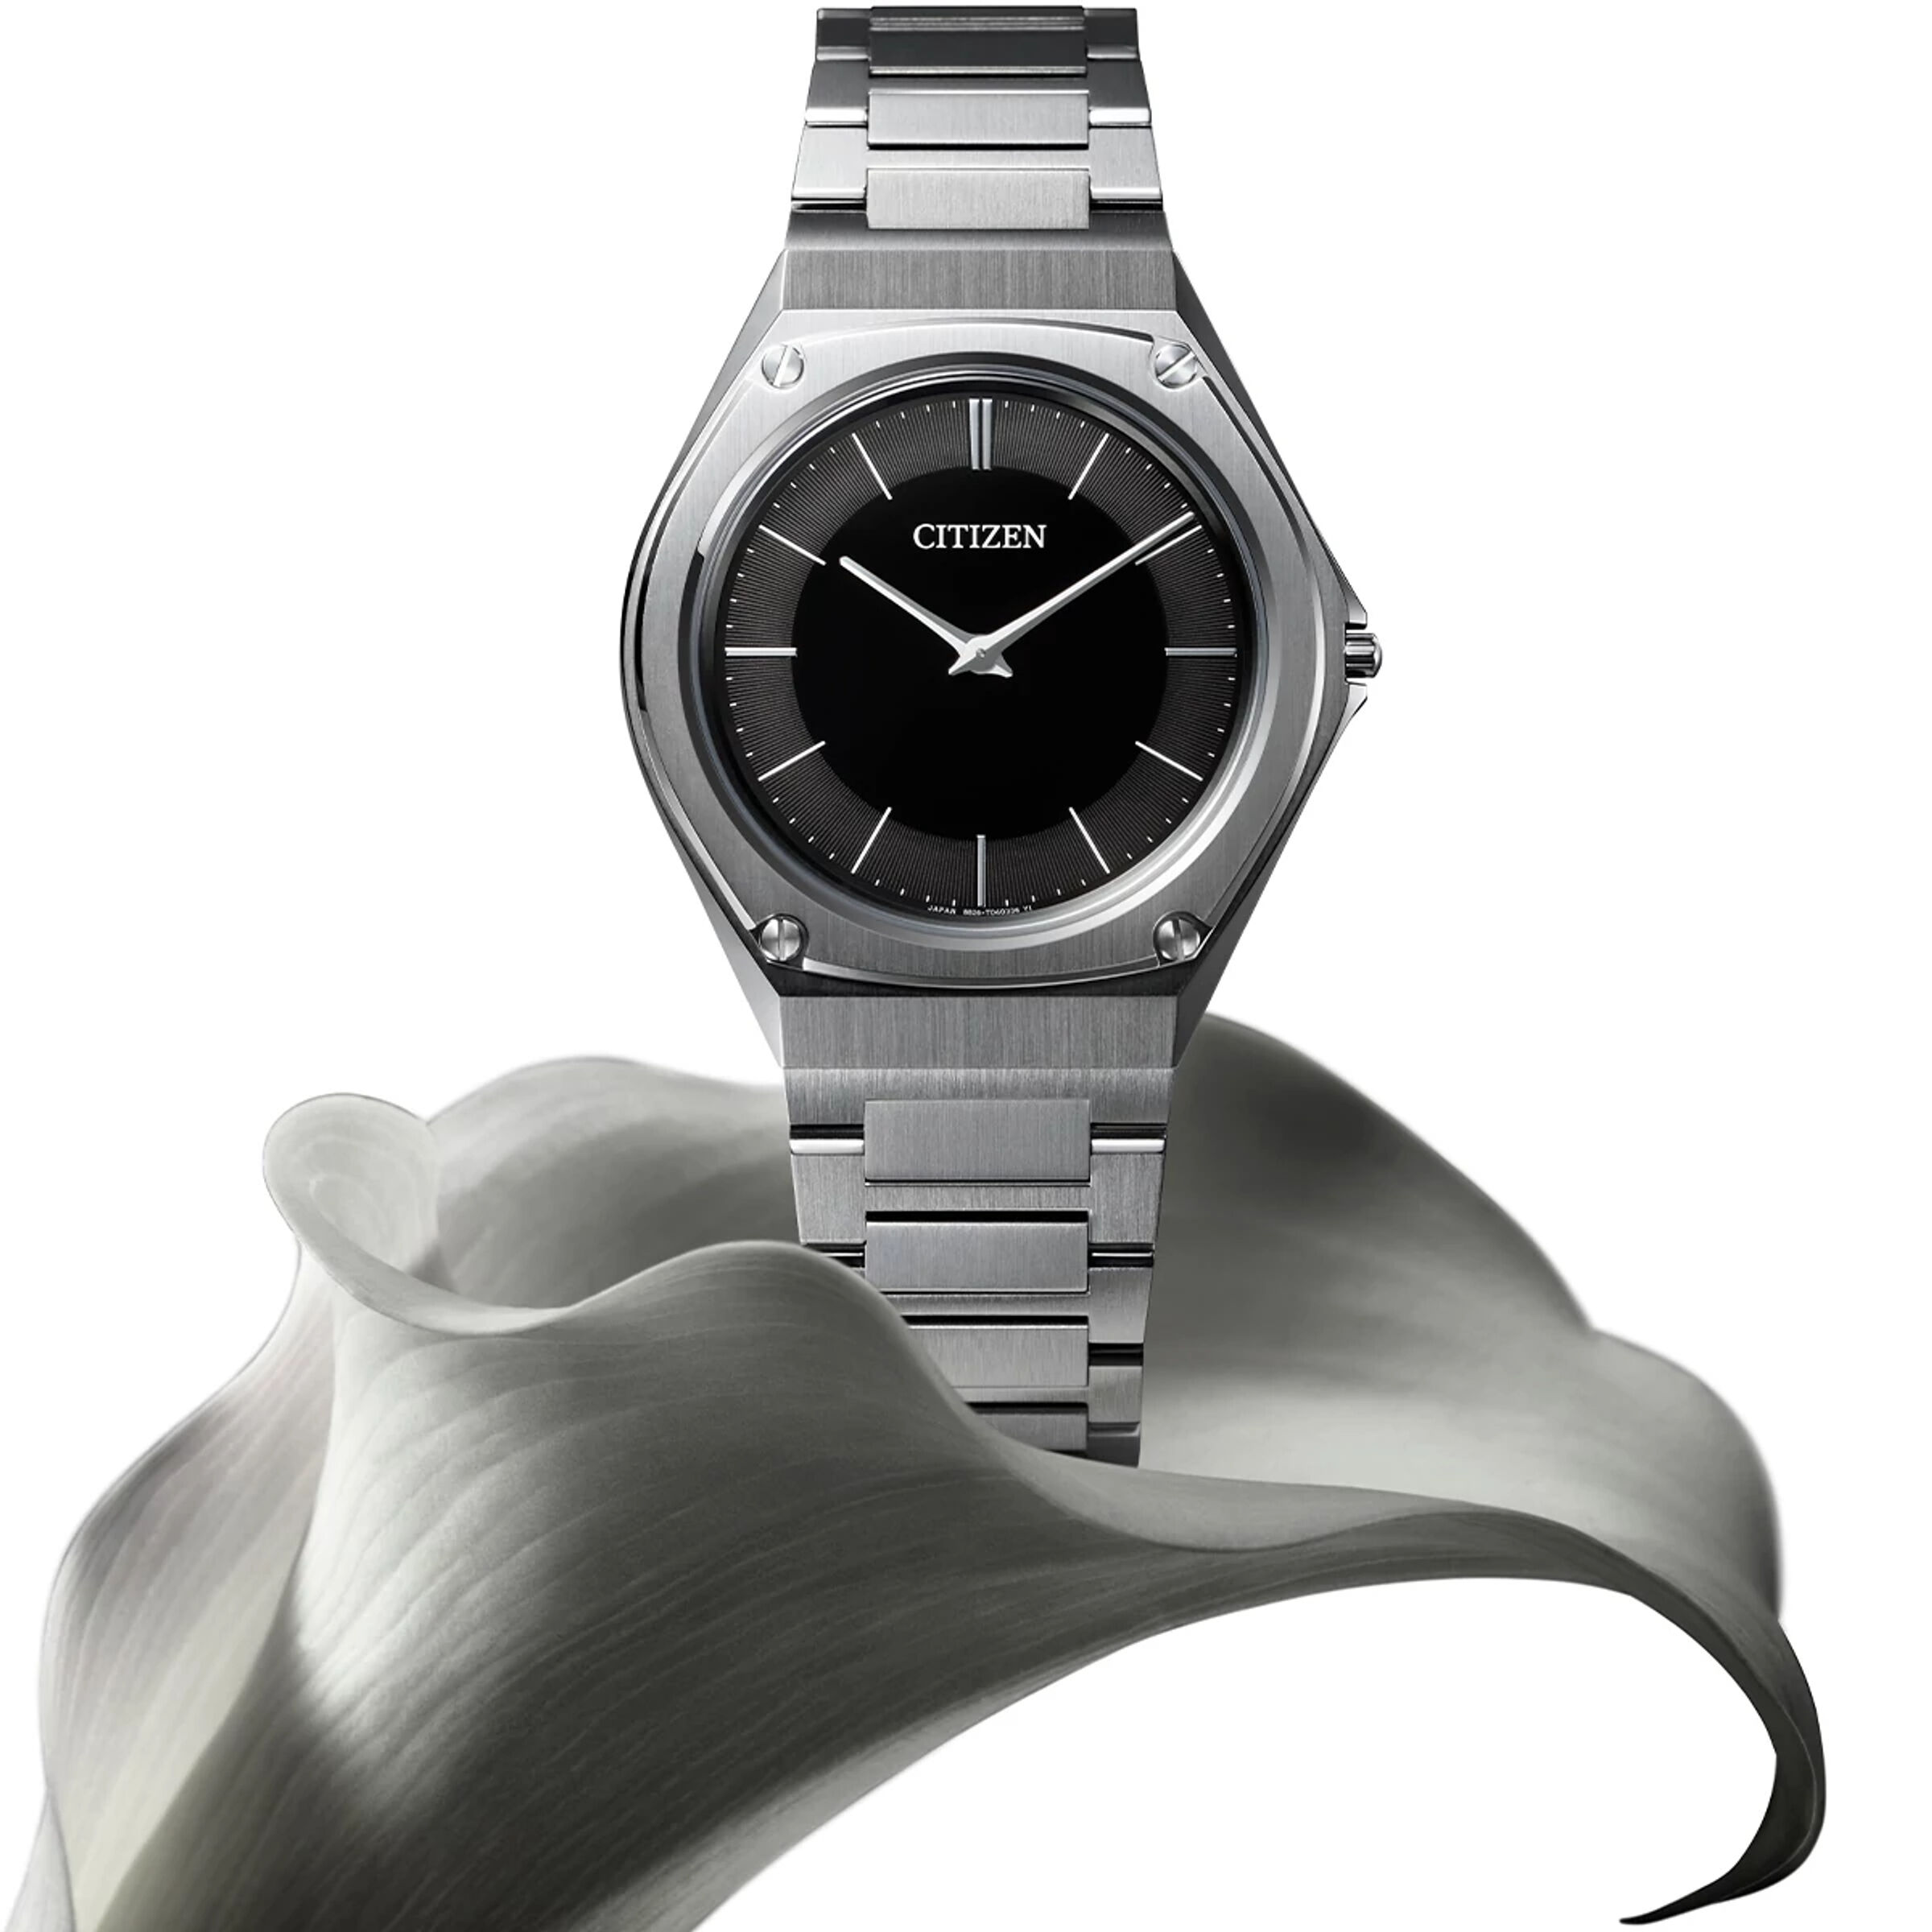 slim watches by SLIM MADE - Extra thin watches for a slim lifestyle!